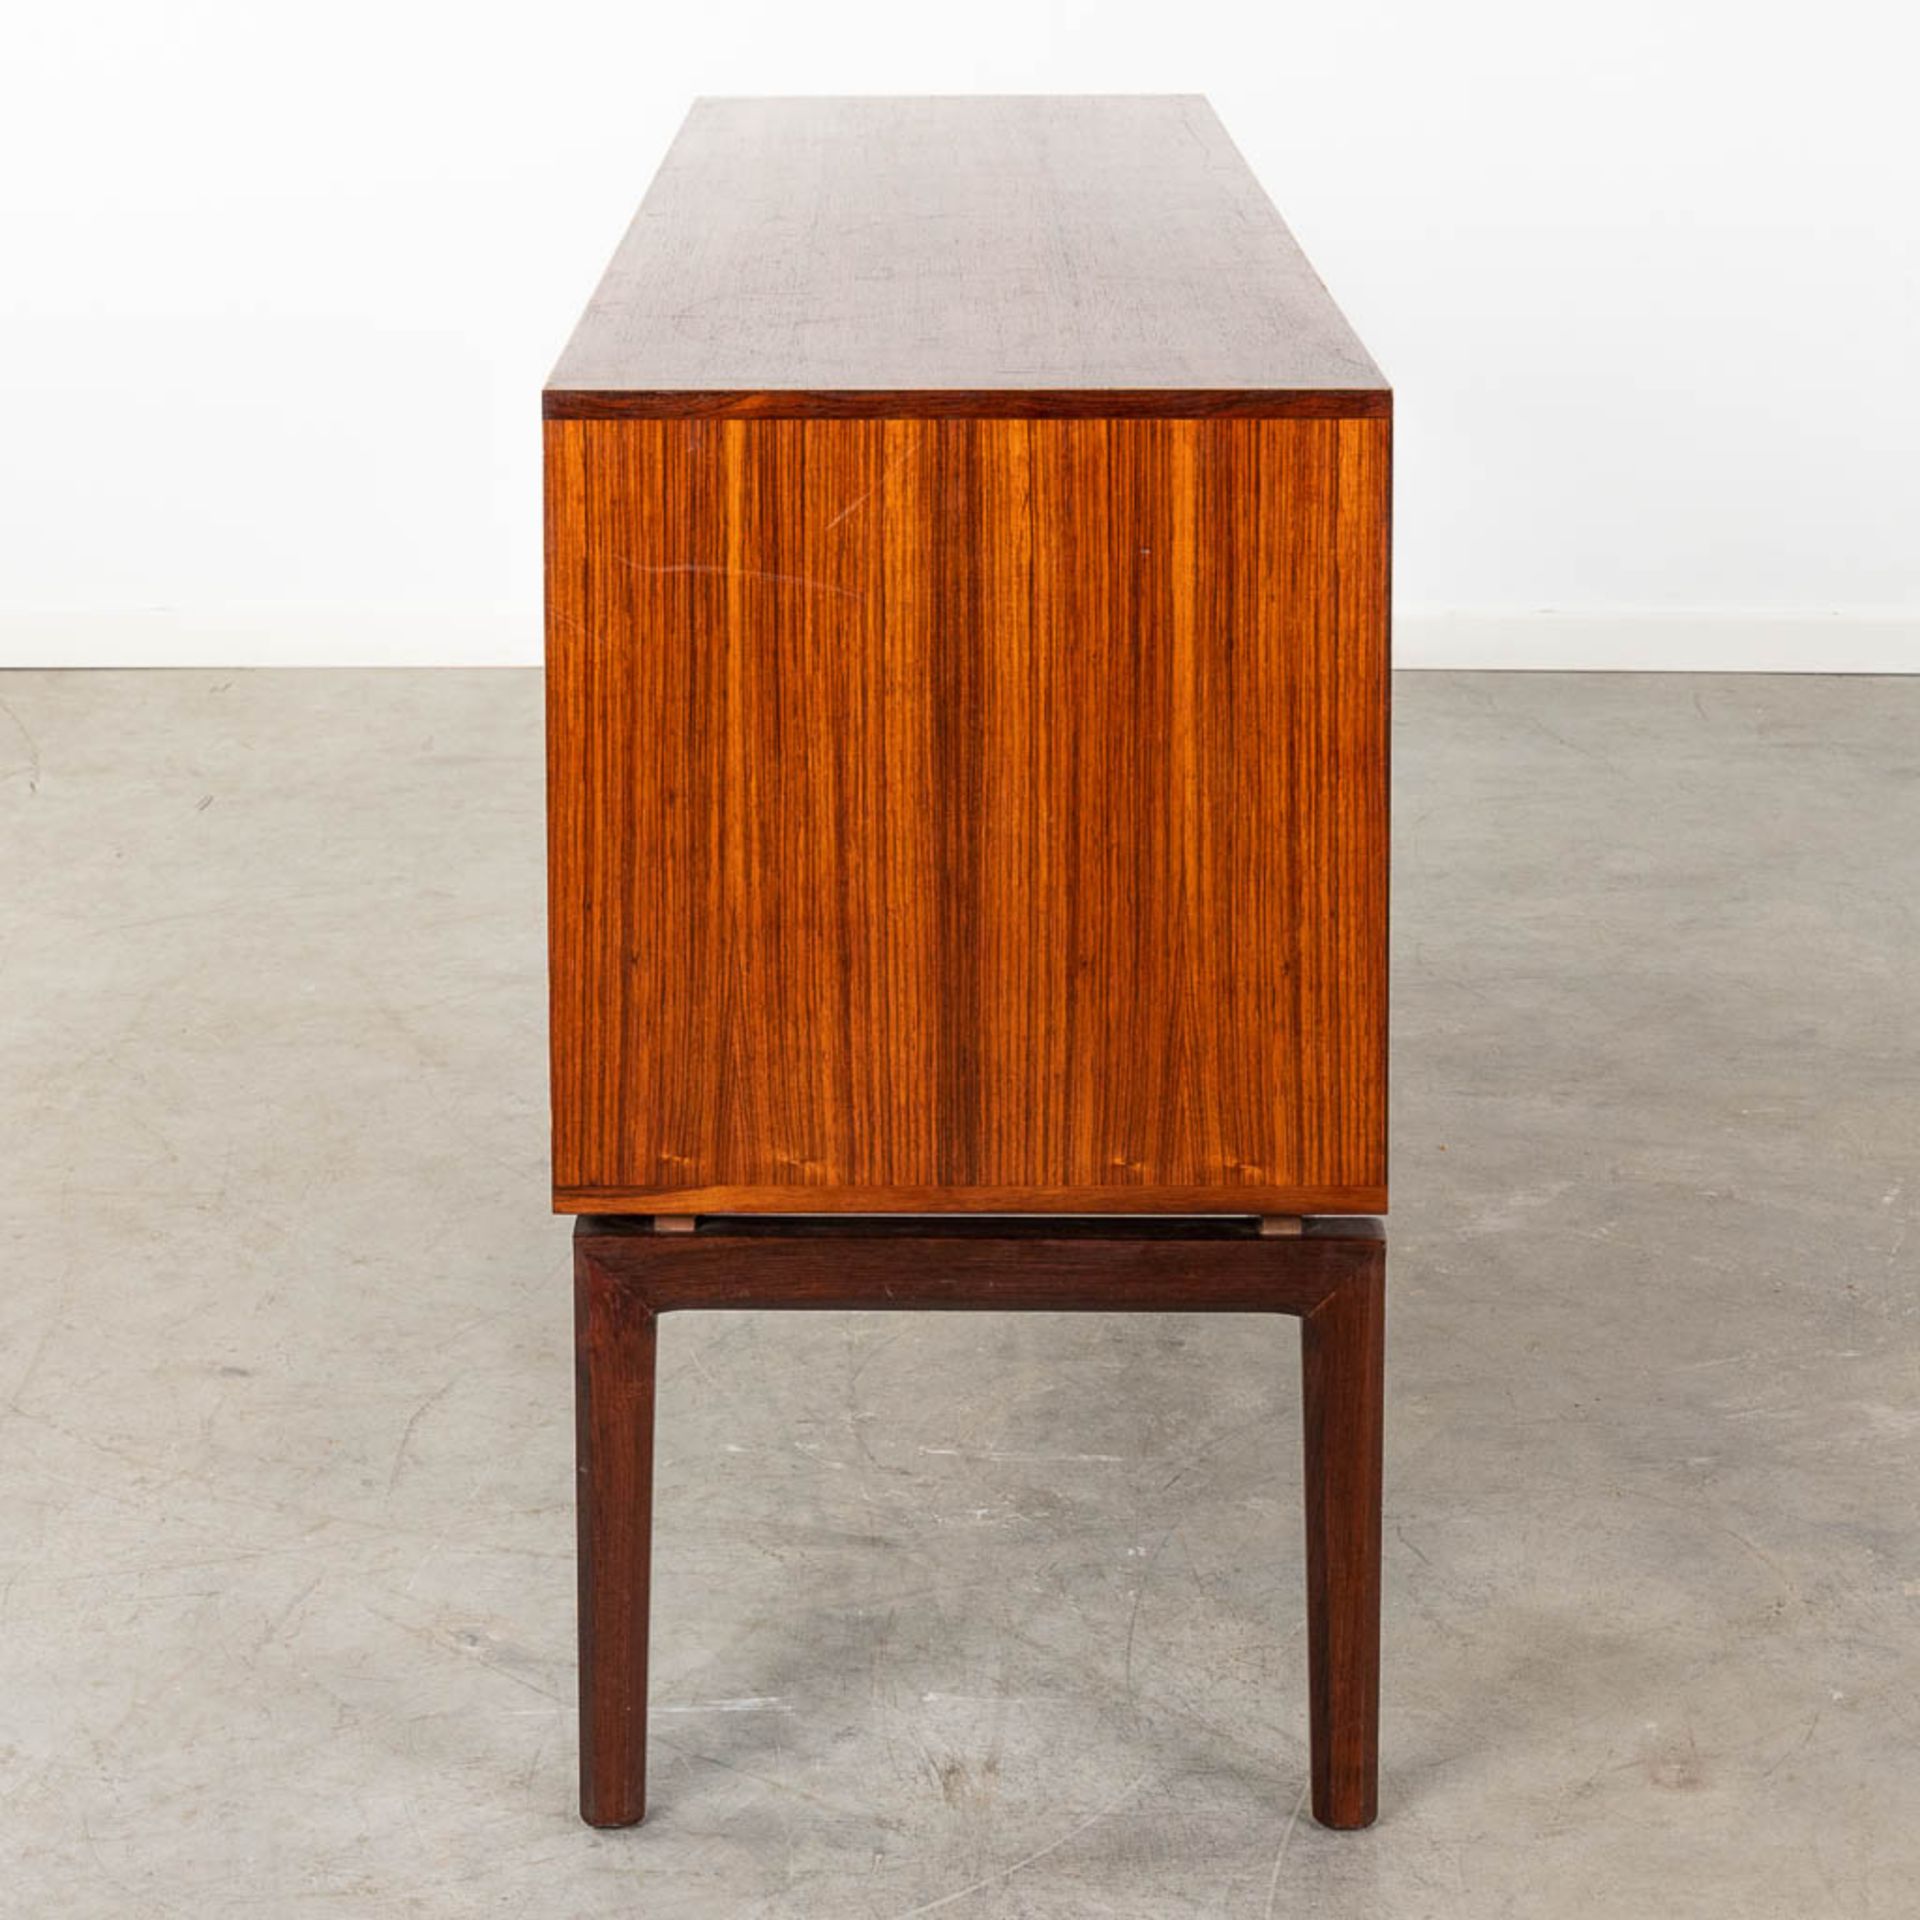 A mid-century Scandinavian Sideboard with 6 drawers, and rosewood veneer. (D:45 x W:150 x H:80 cm) - Image 7 of 12